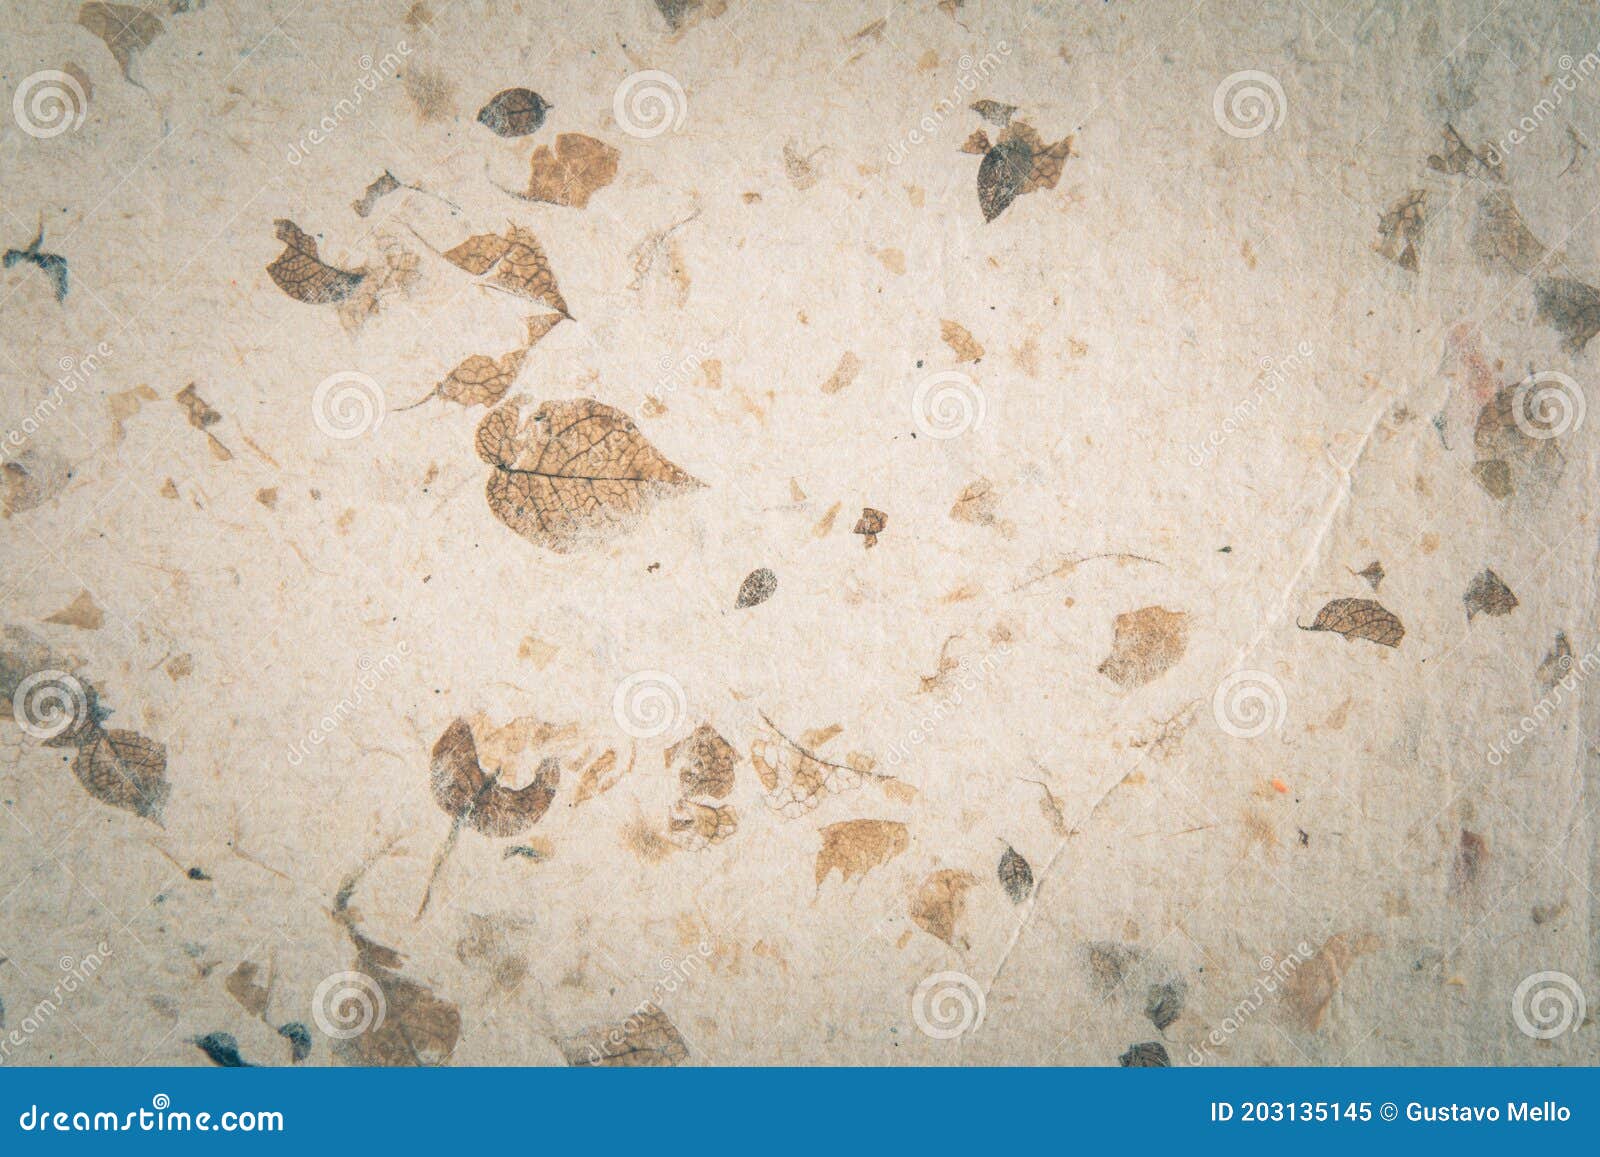 closeup of handmade paper texture vintage background with leaf